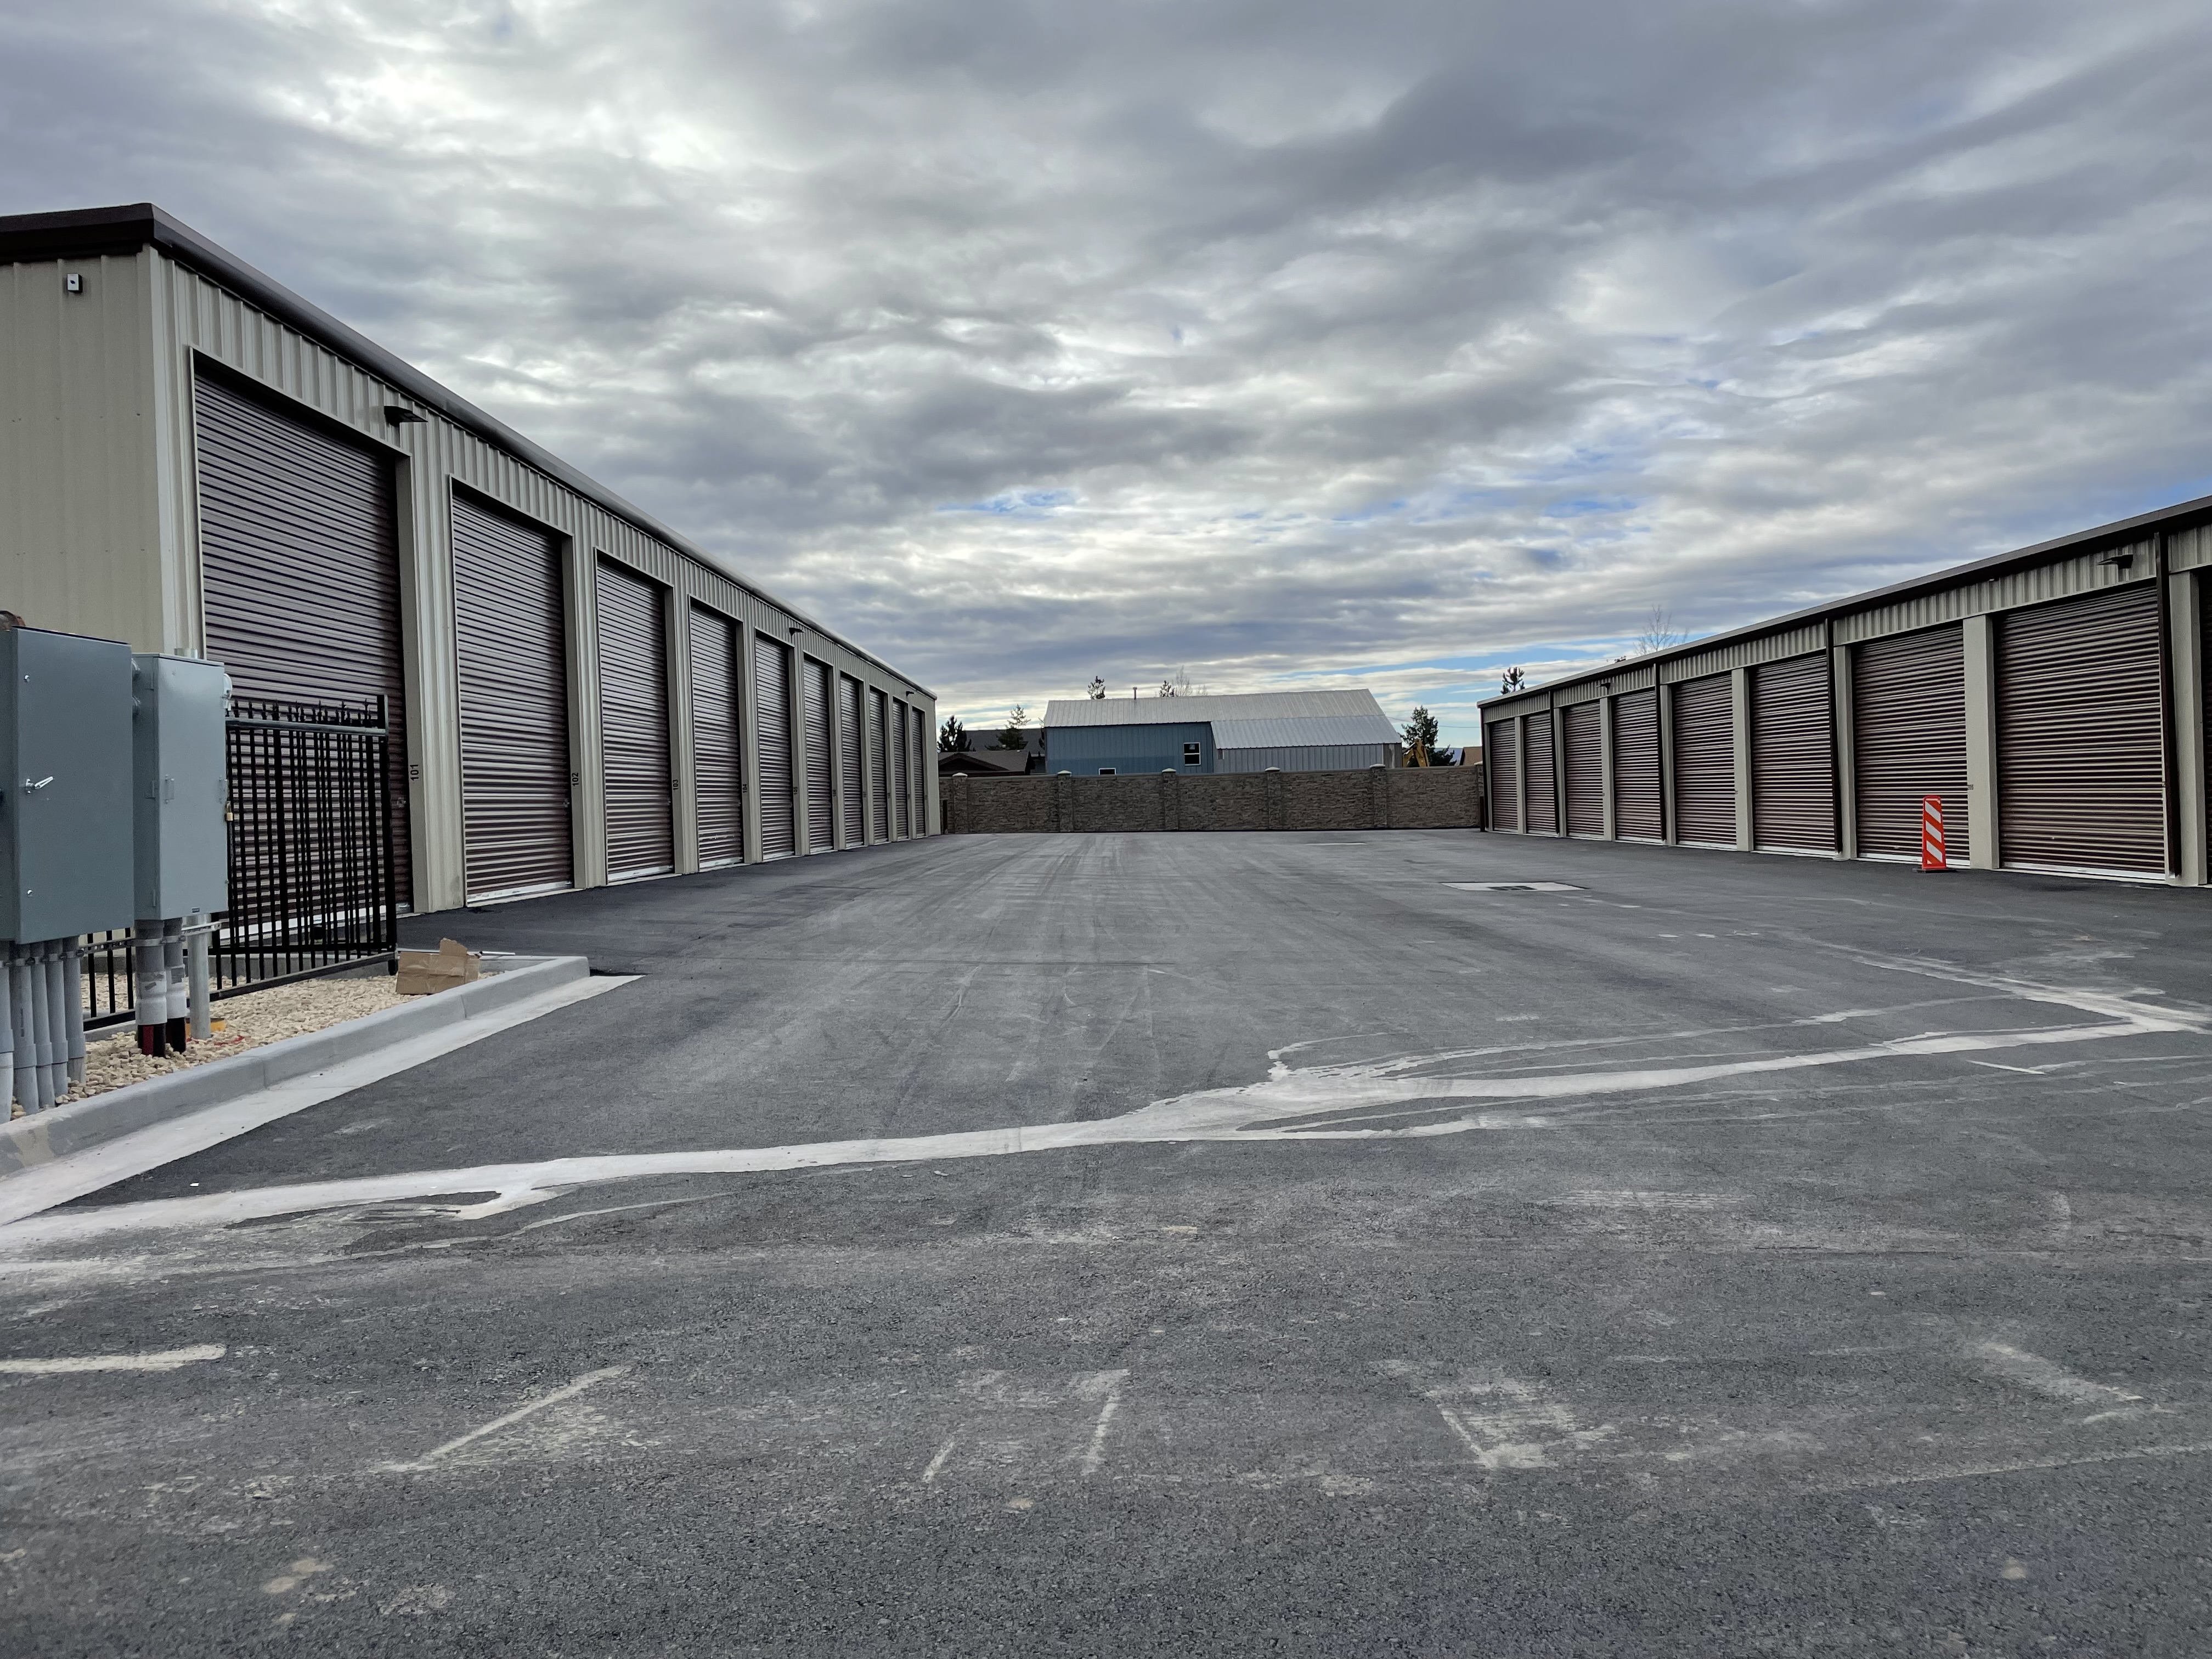 two storage buildings with drive up access units and a wide driving lane